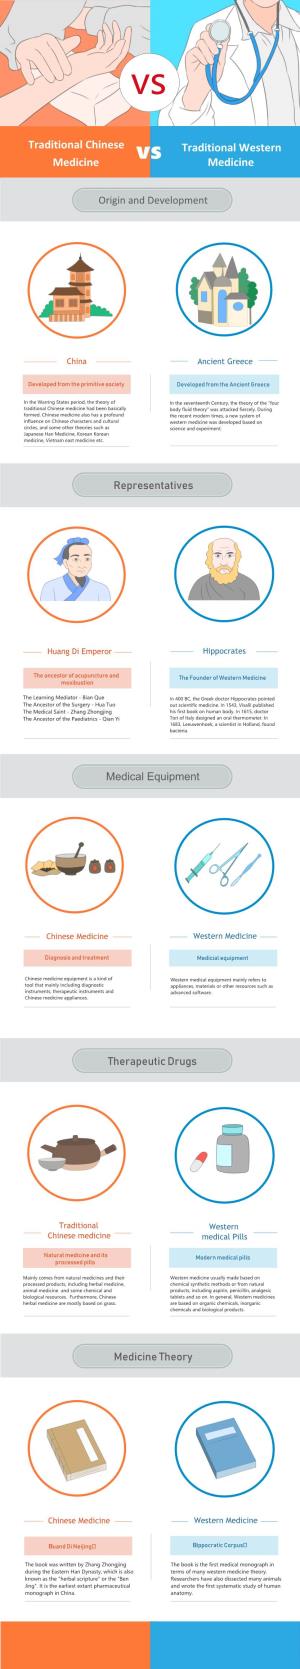 Chinese and Western Medicine Infographic